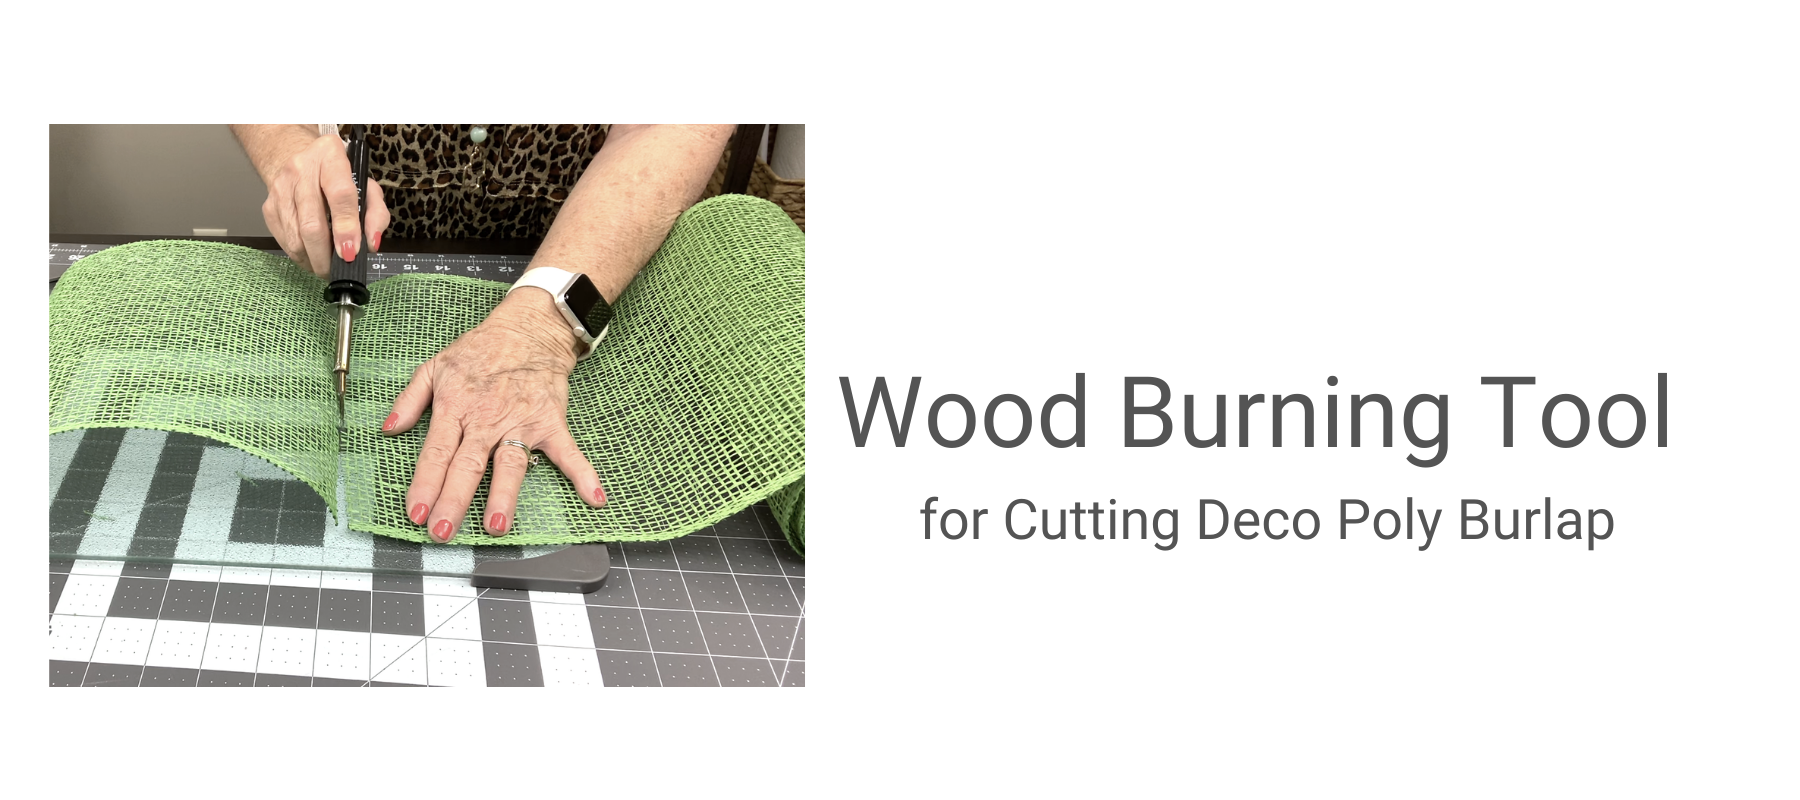 How to Use a Wood Burning Tool to Cut Deco Poly Burlap Mesh